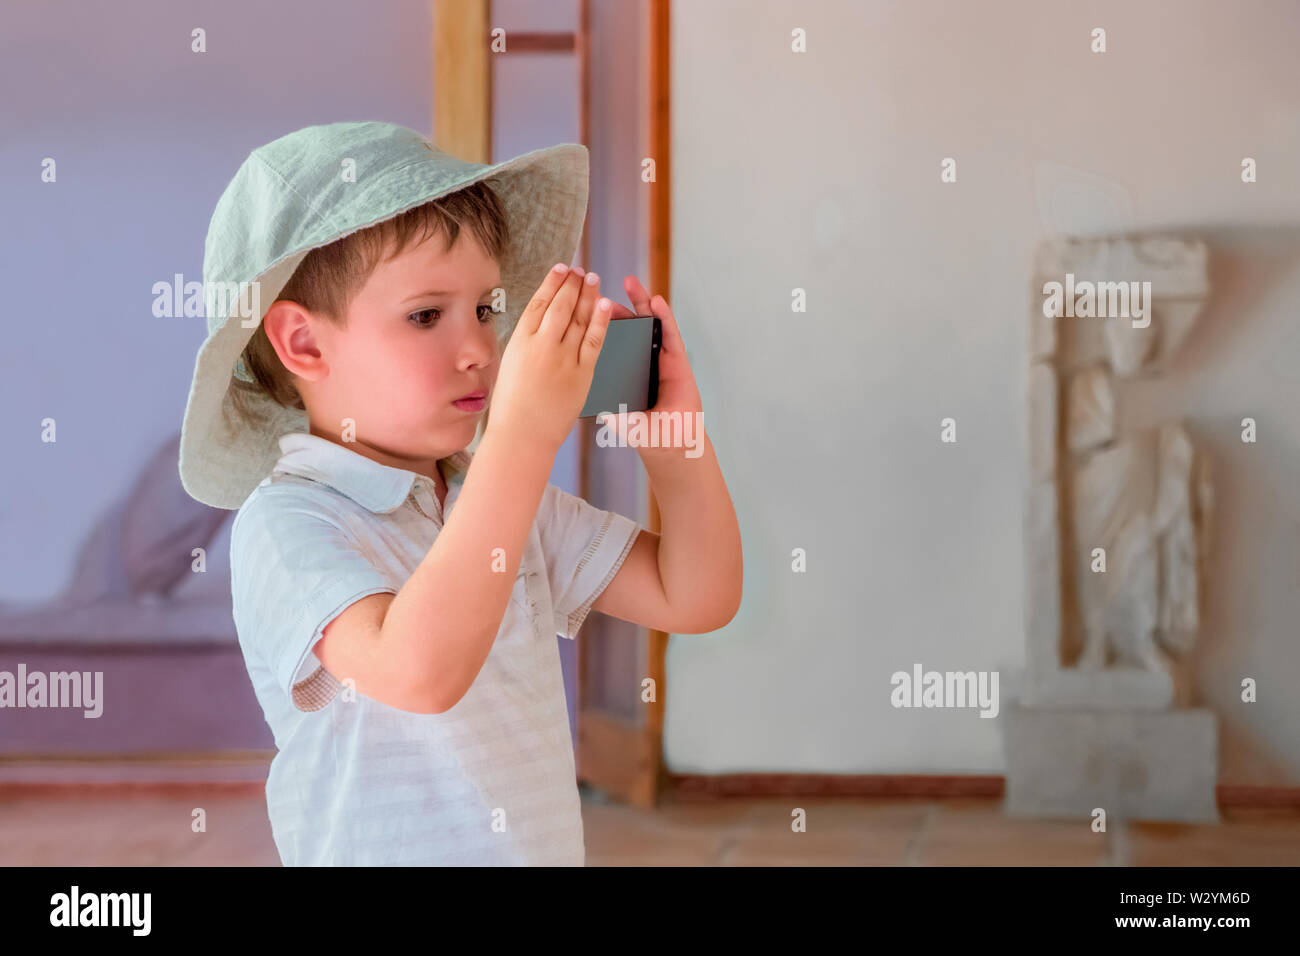 Media school concept. Education background. New approach to learning process. Young filmmaker. Modern museum concept. Young film director. Preschooler Stock Photo